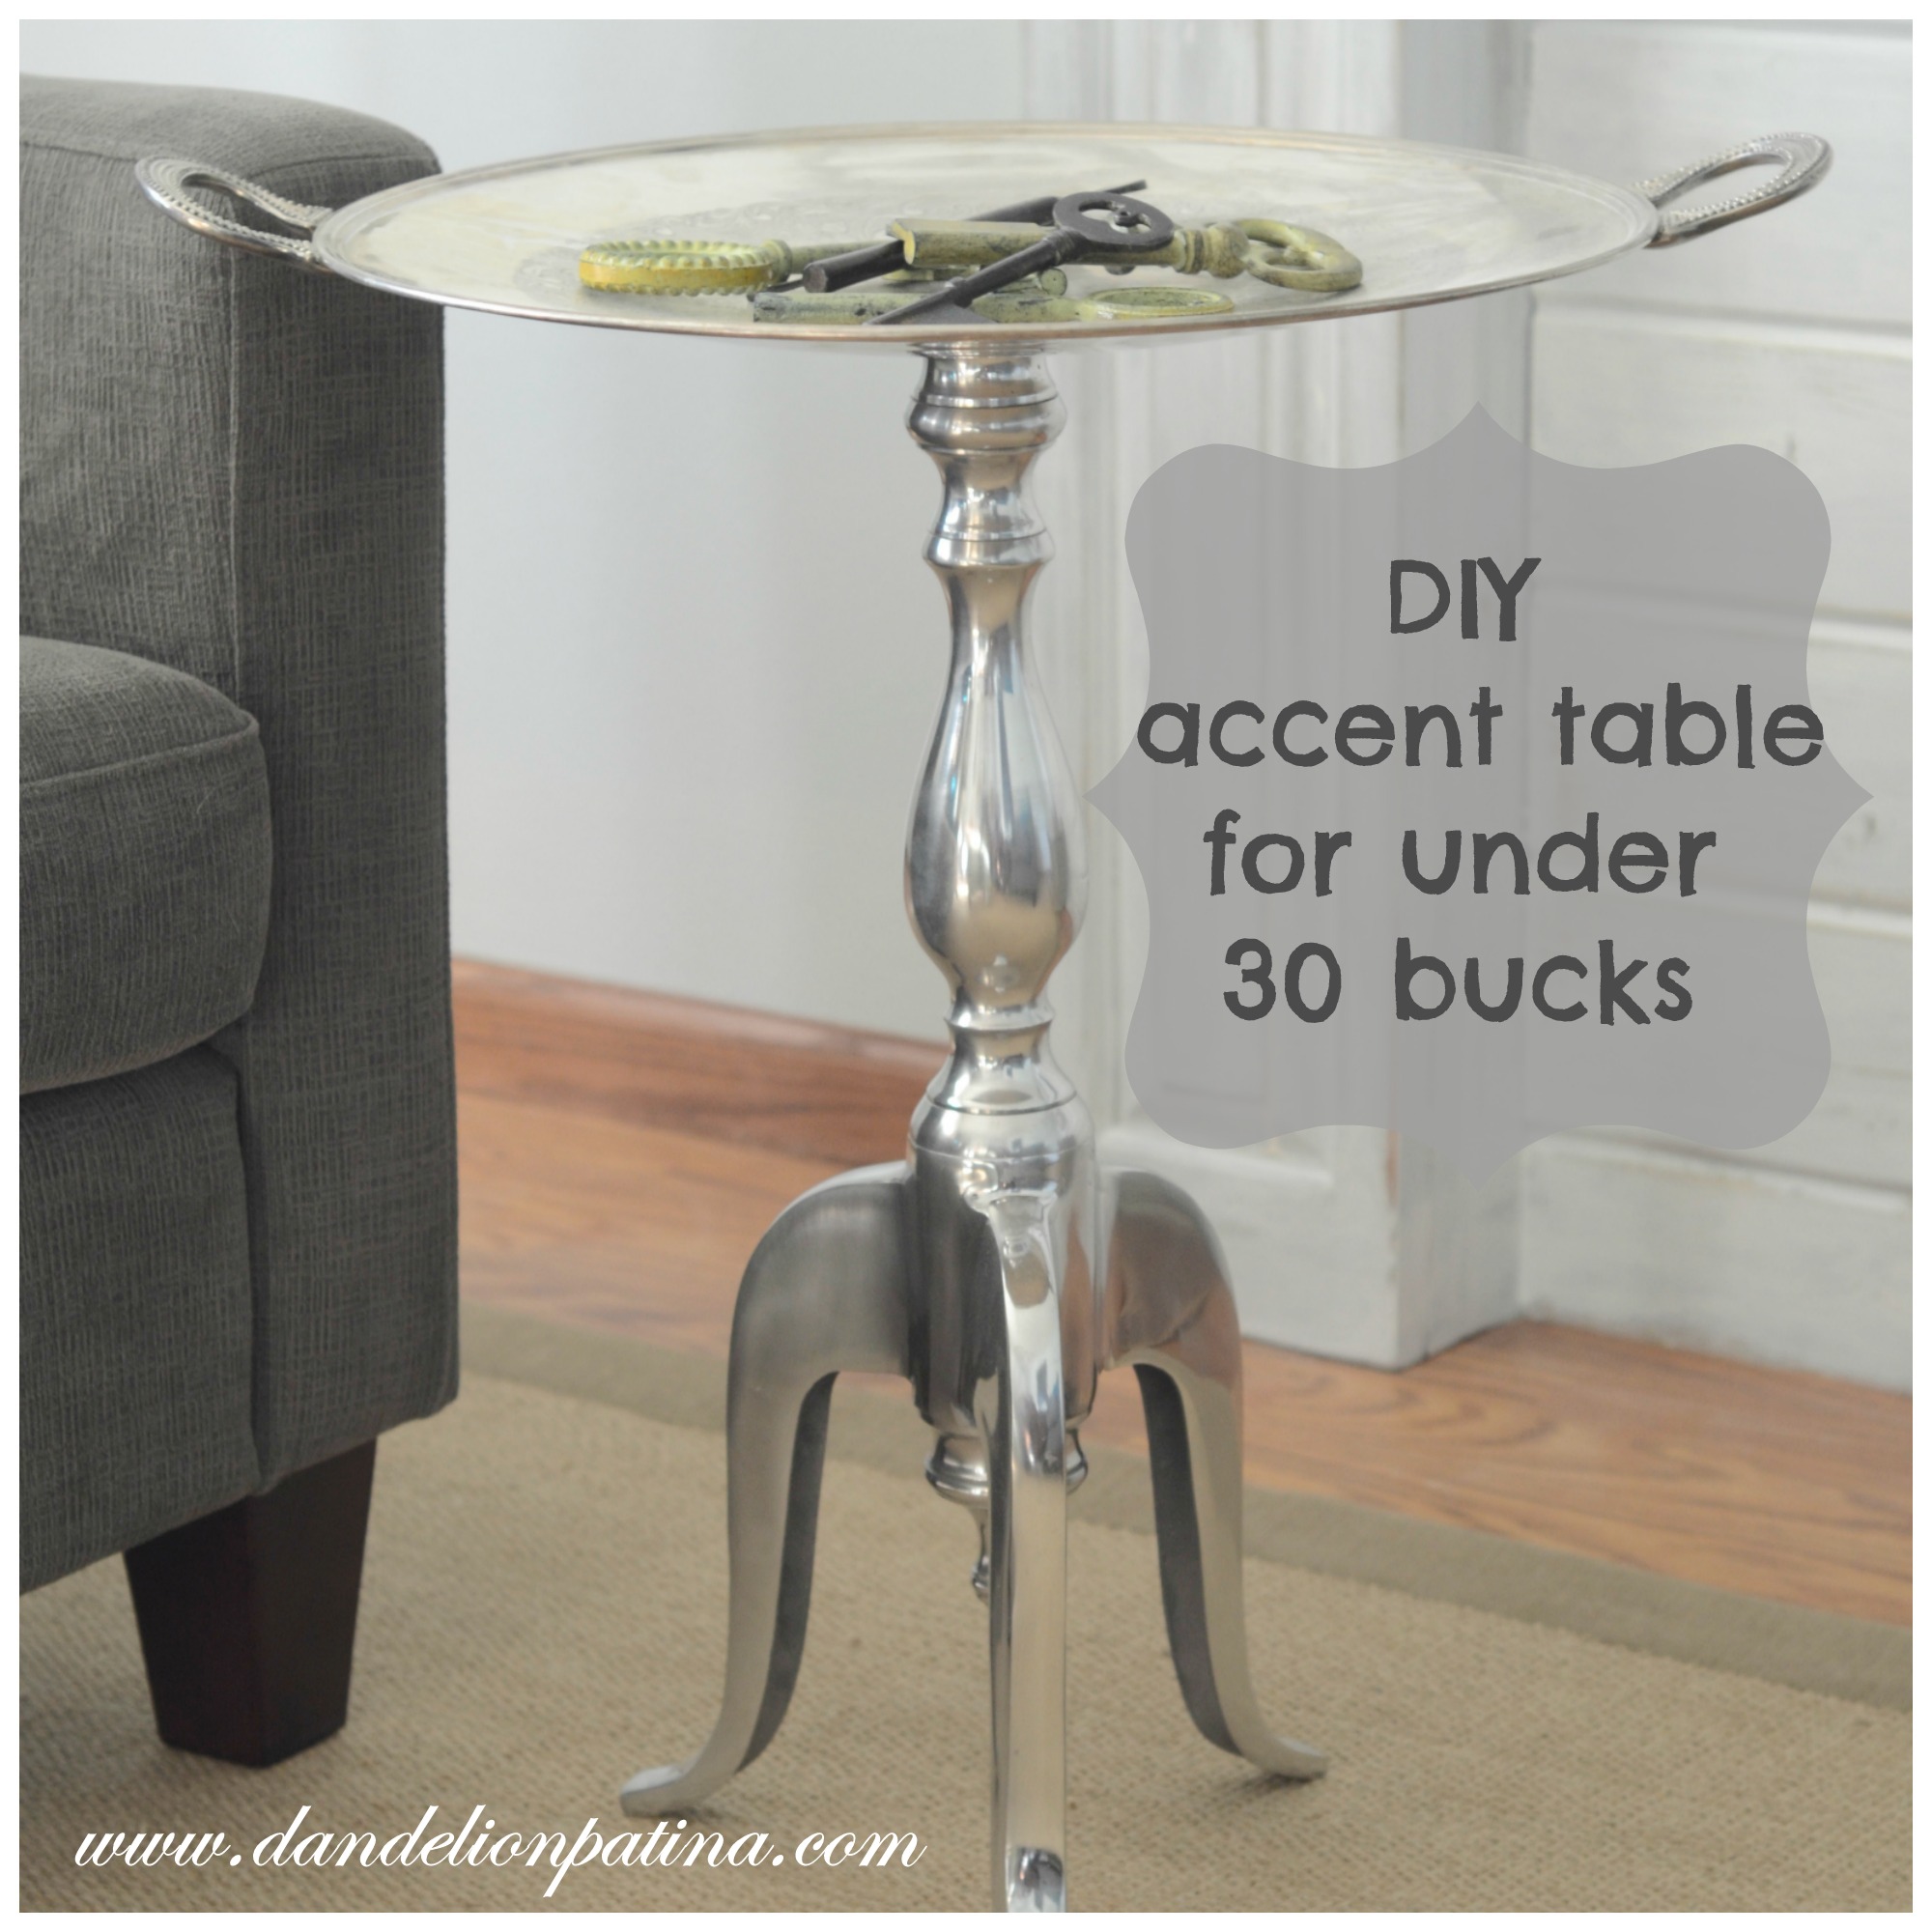 diy metal accent table dandelion patina bucks tables furniture live edge walnut patio occasional nautical wall decor tall mirrored side cooler coffee foot long console wood and